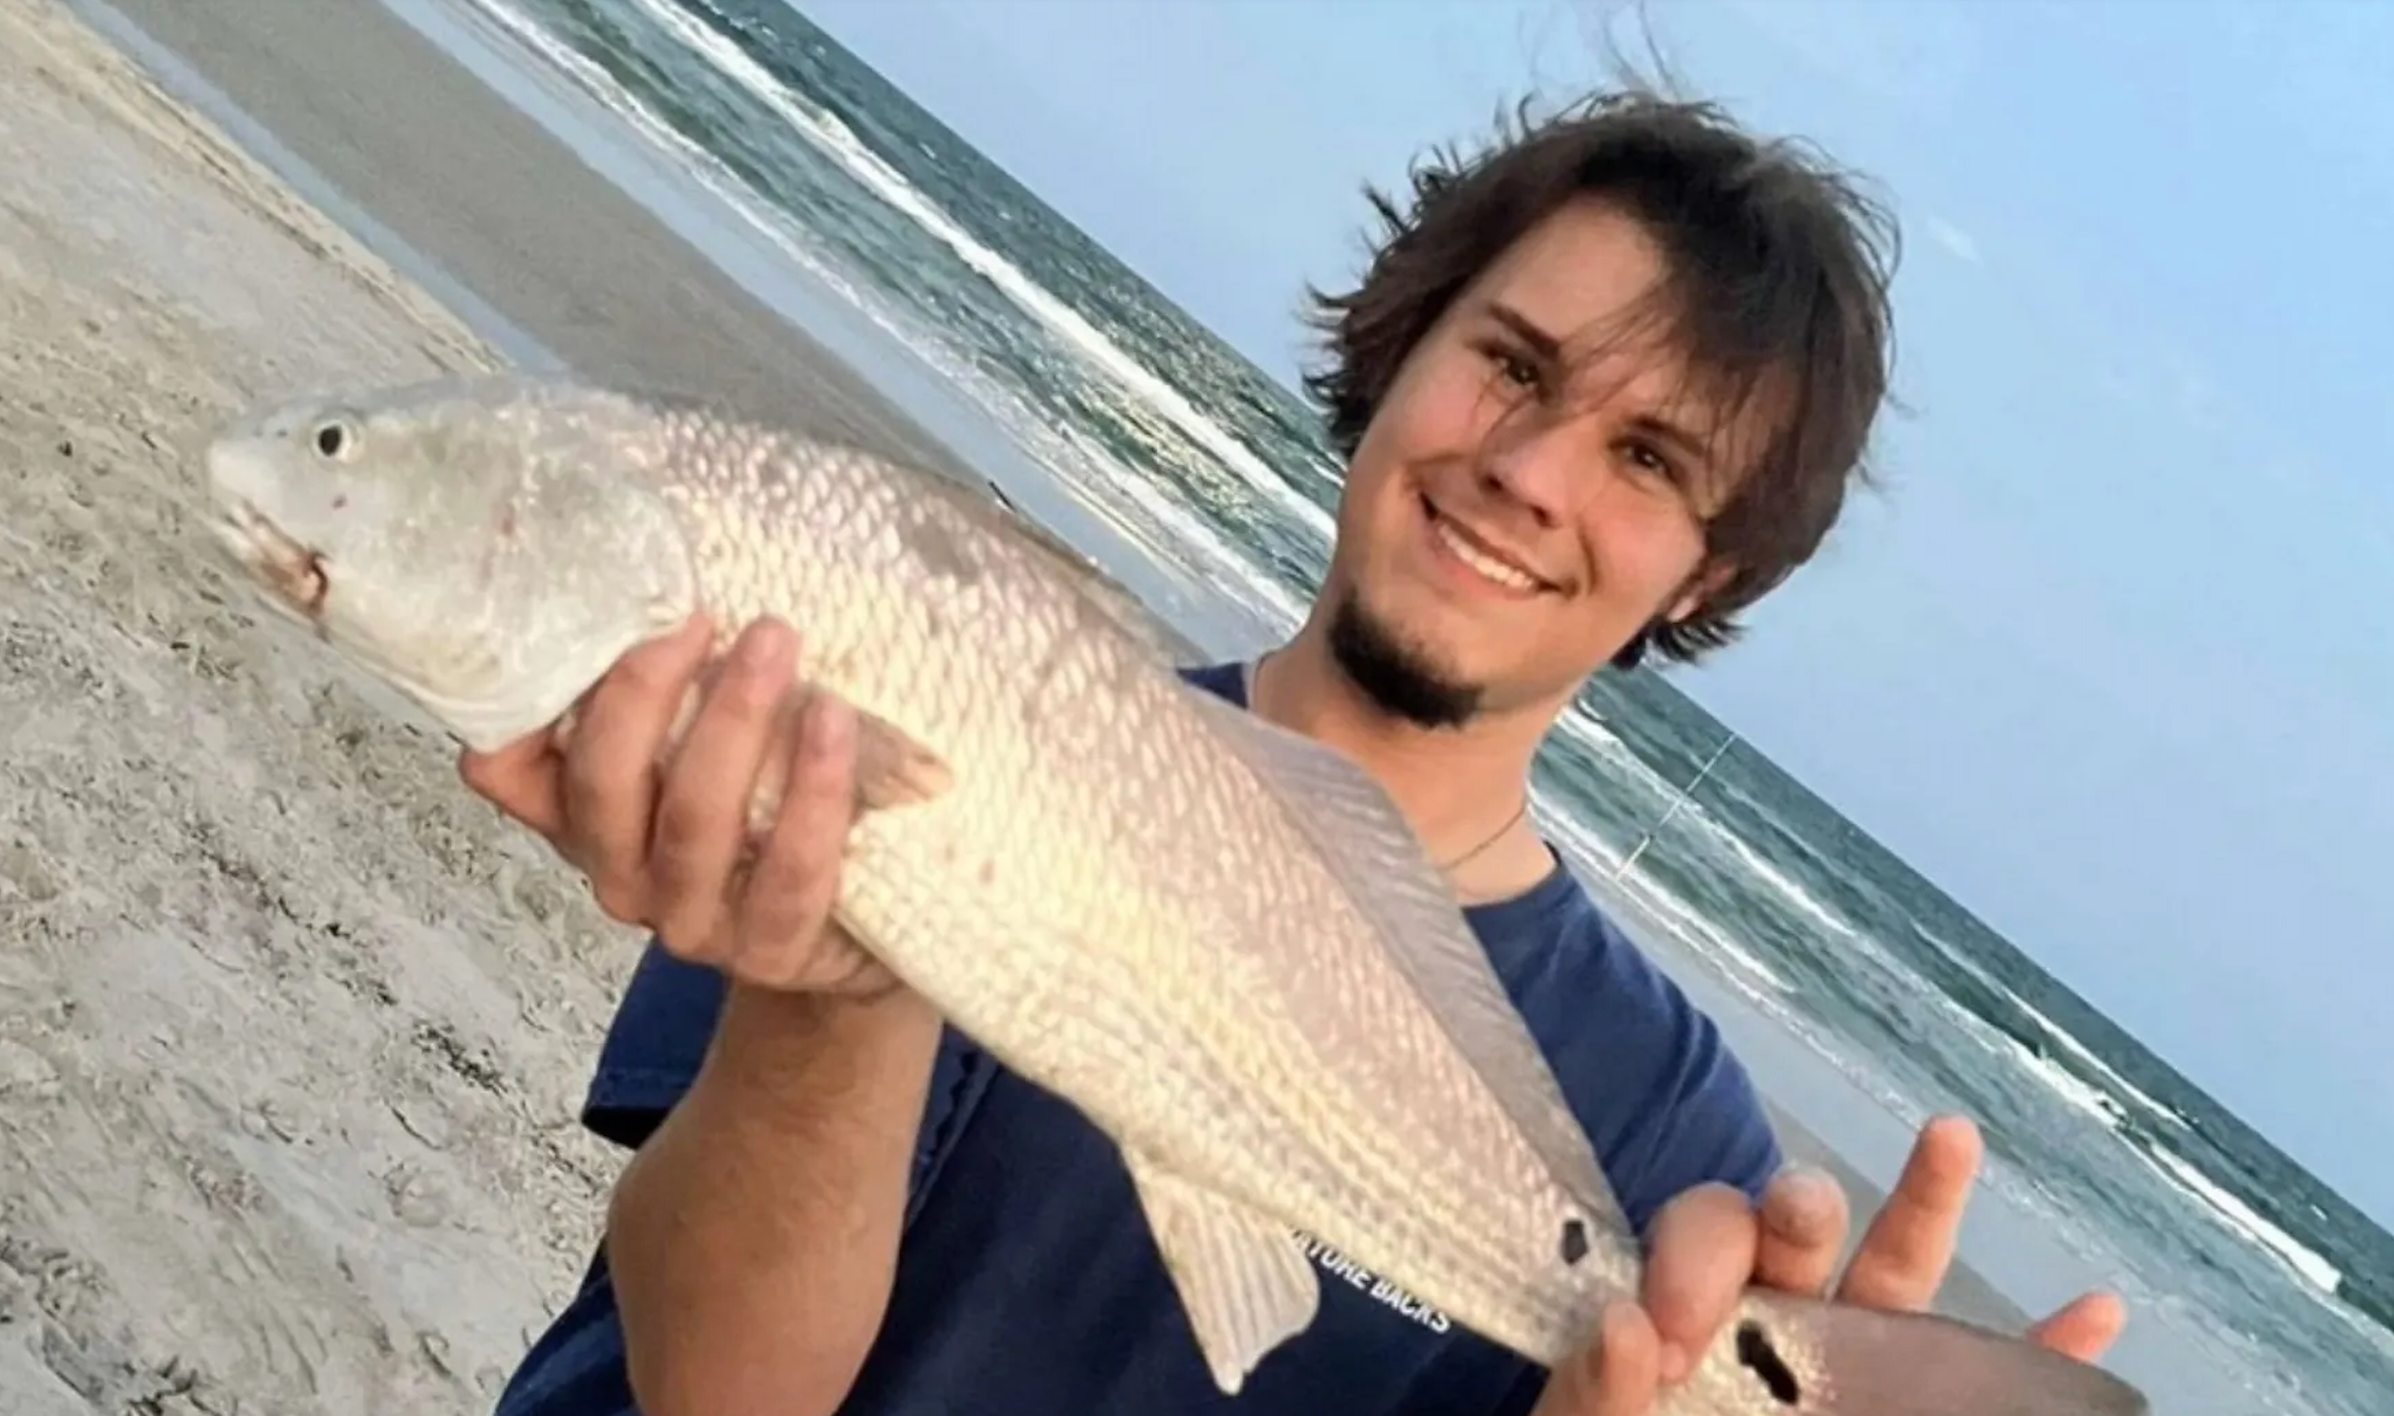 Caleb Harris, a 21-year-old Texas A&M student, has been missing since 4 March